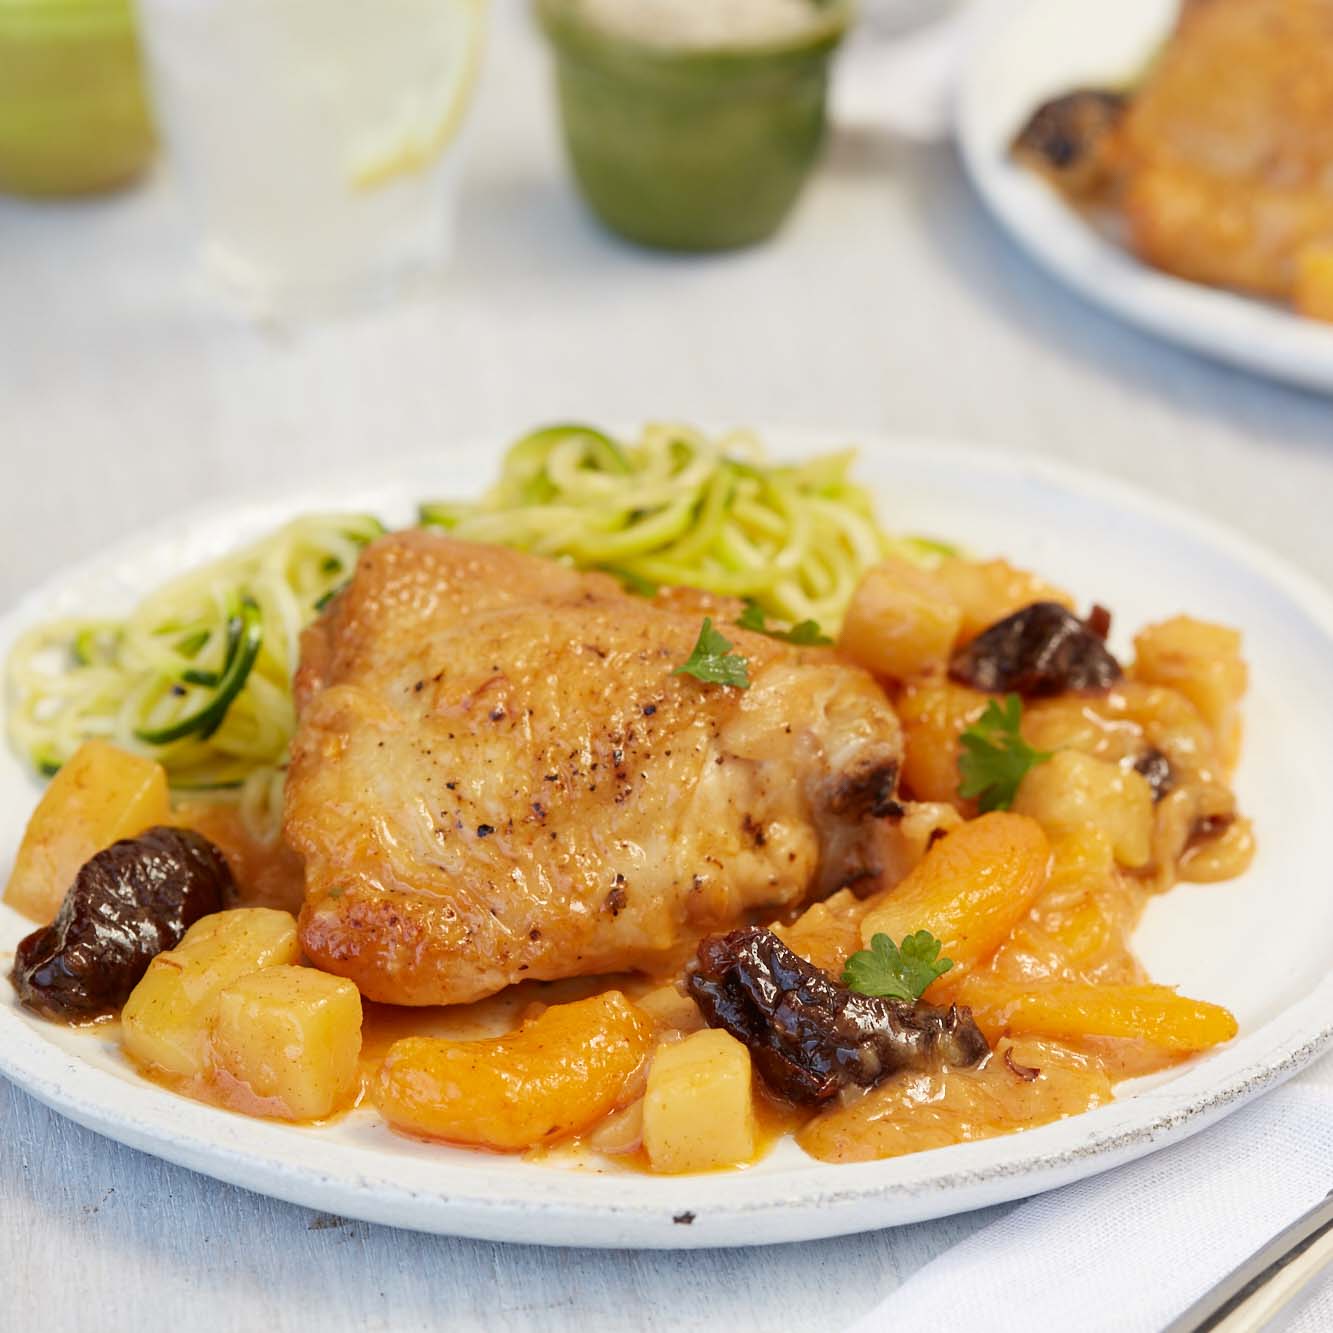 Chicken thighs are more flavorful when braised with Sunsweet prunes and dried apricots.